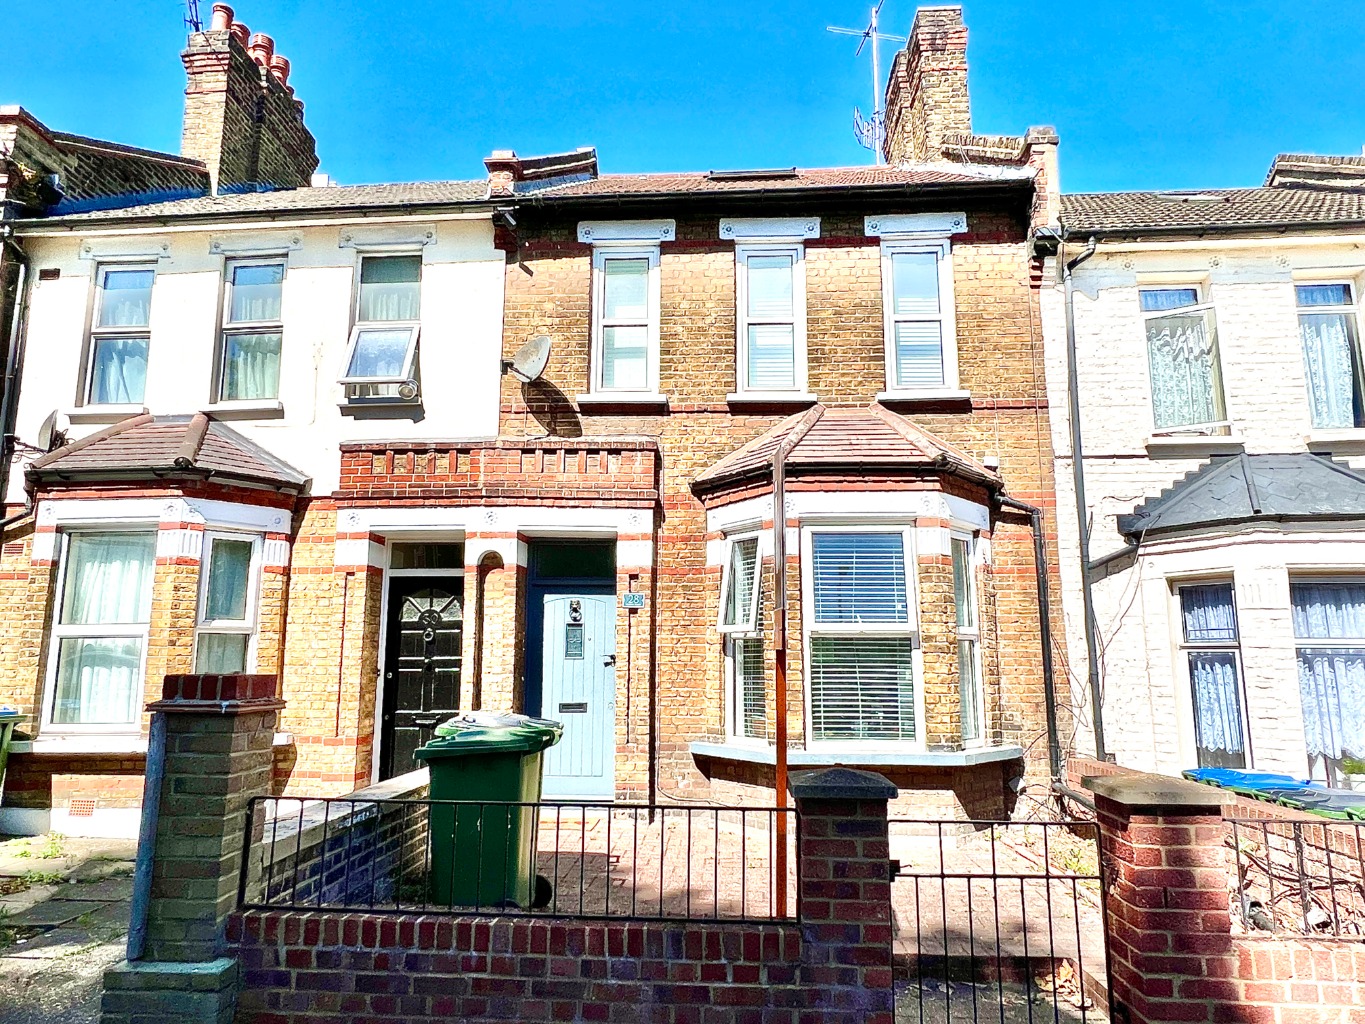 A very spacious four bedroomed , three bathroom terrace house to let, in Griffin Road, Plumstead. The property is very conveniently located, as Plumstead mainline station is only a few hundred meters away, with local bus links and shops close at hand.